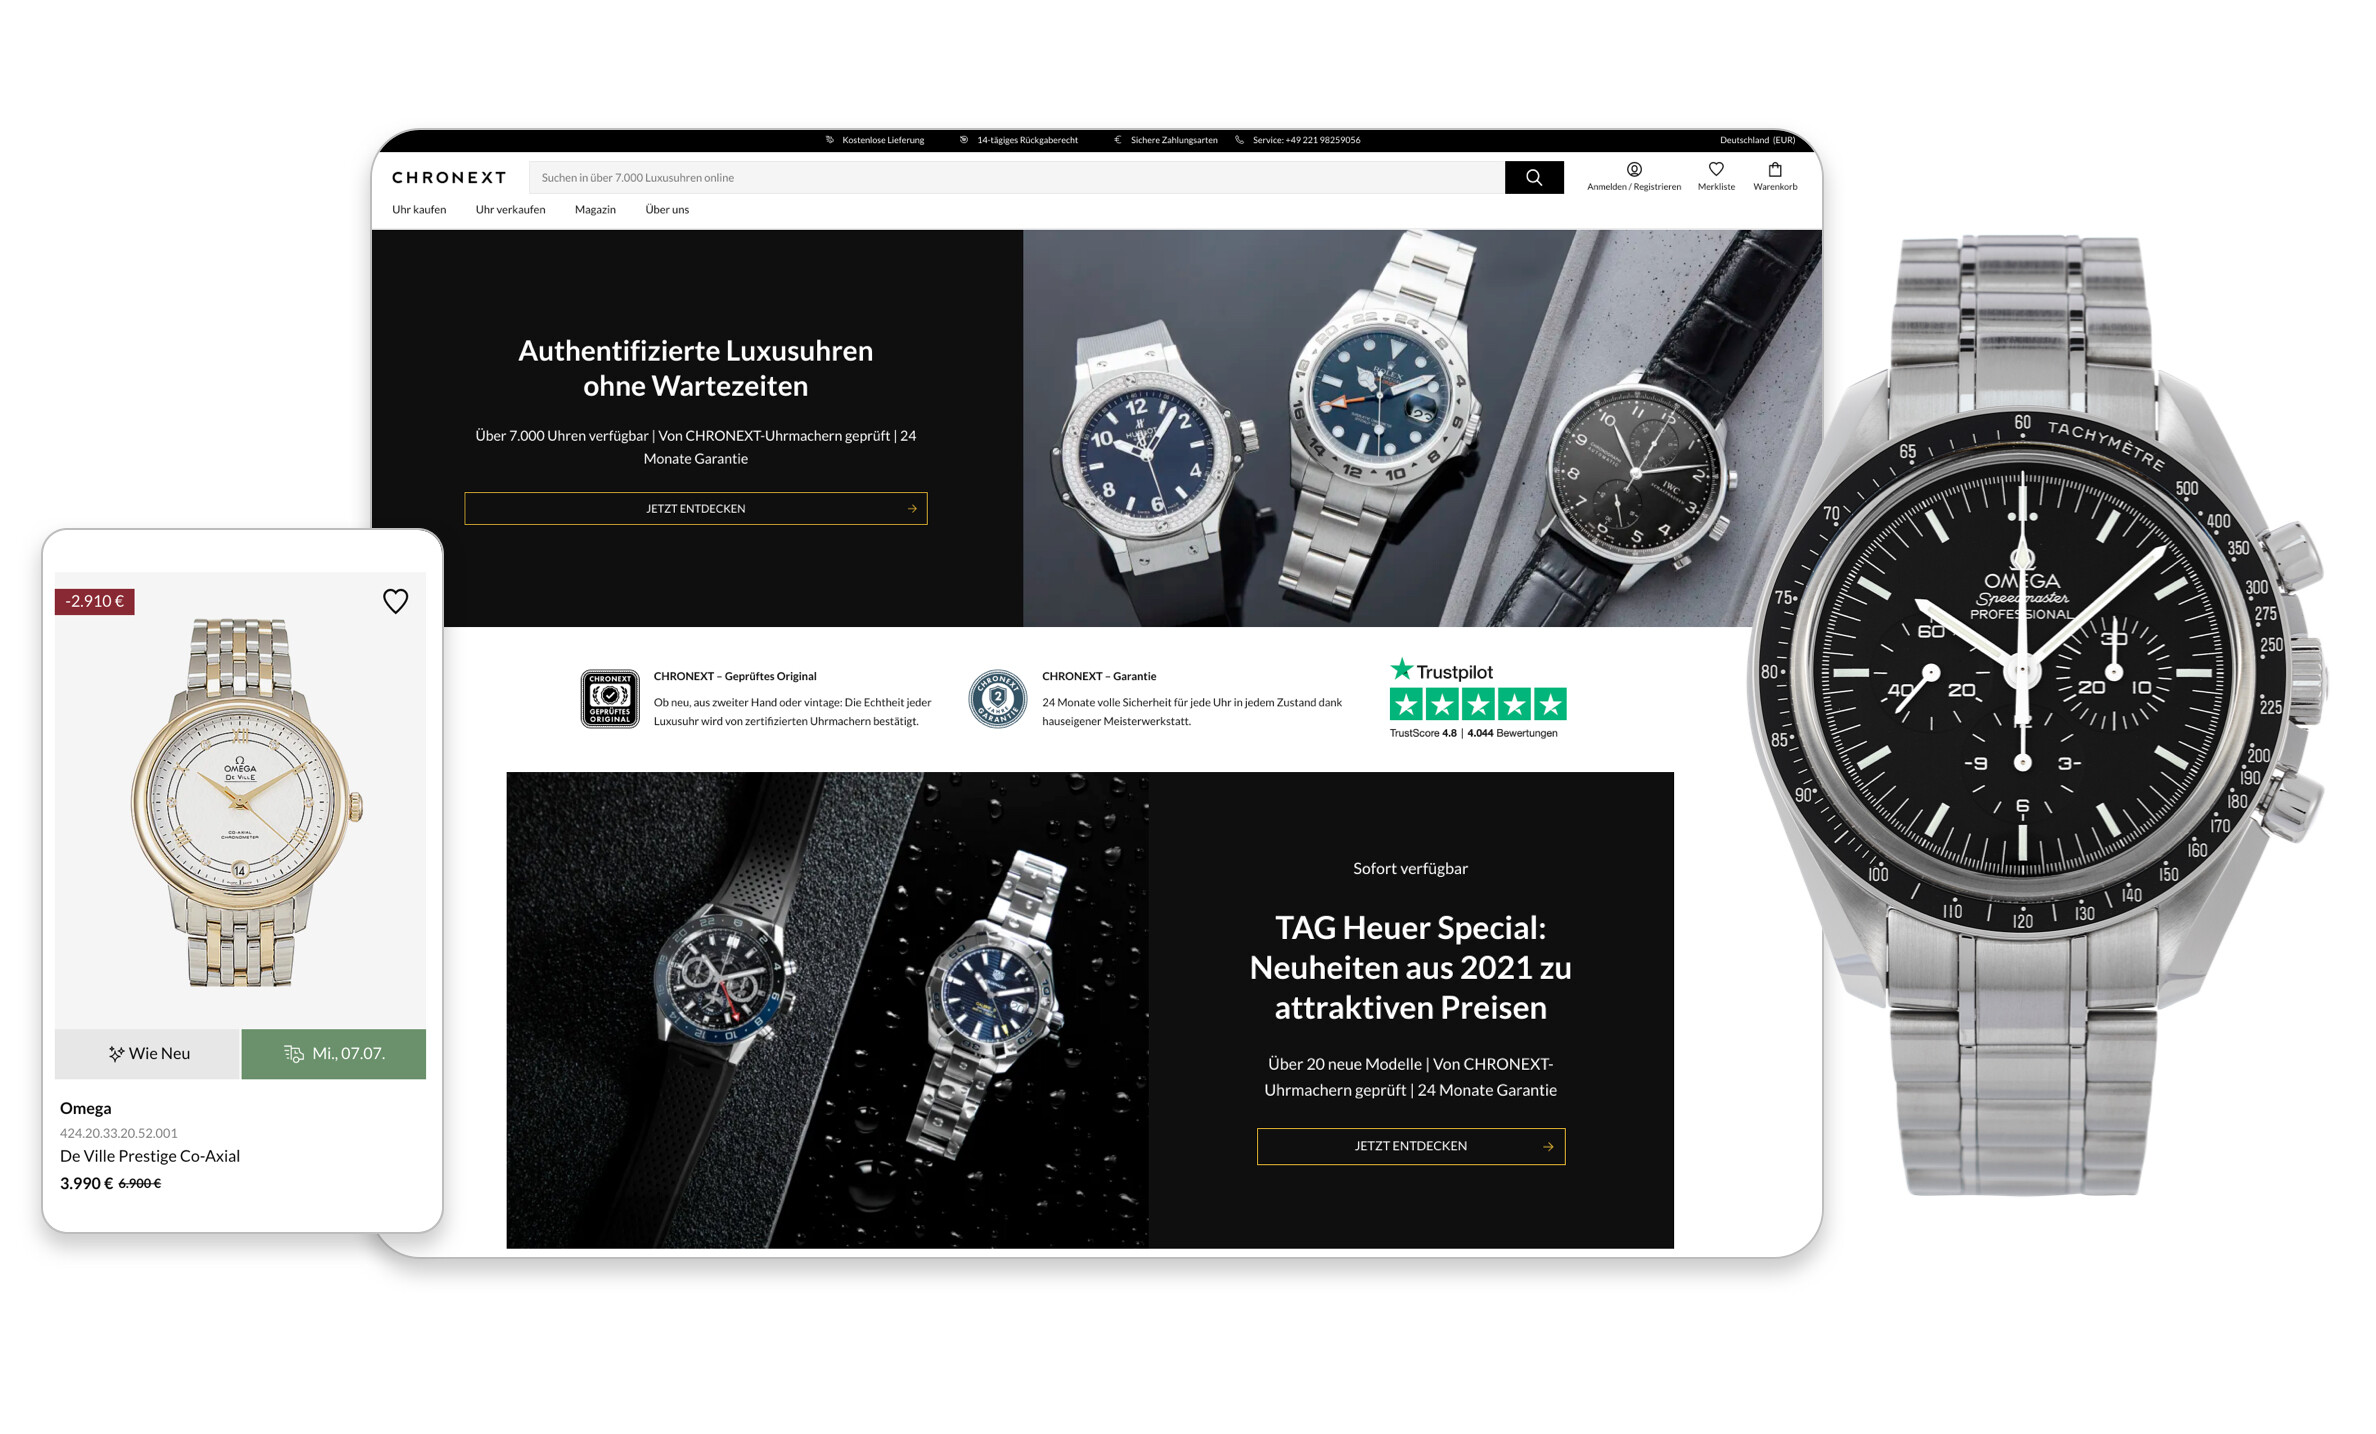 CHRONEXT's new eCommerce can flexibly adapt to new requirements and offers high quality shopping experinces that meets the high expectations of their clientele